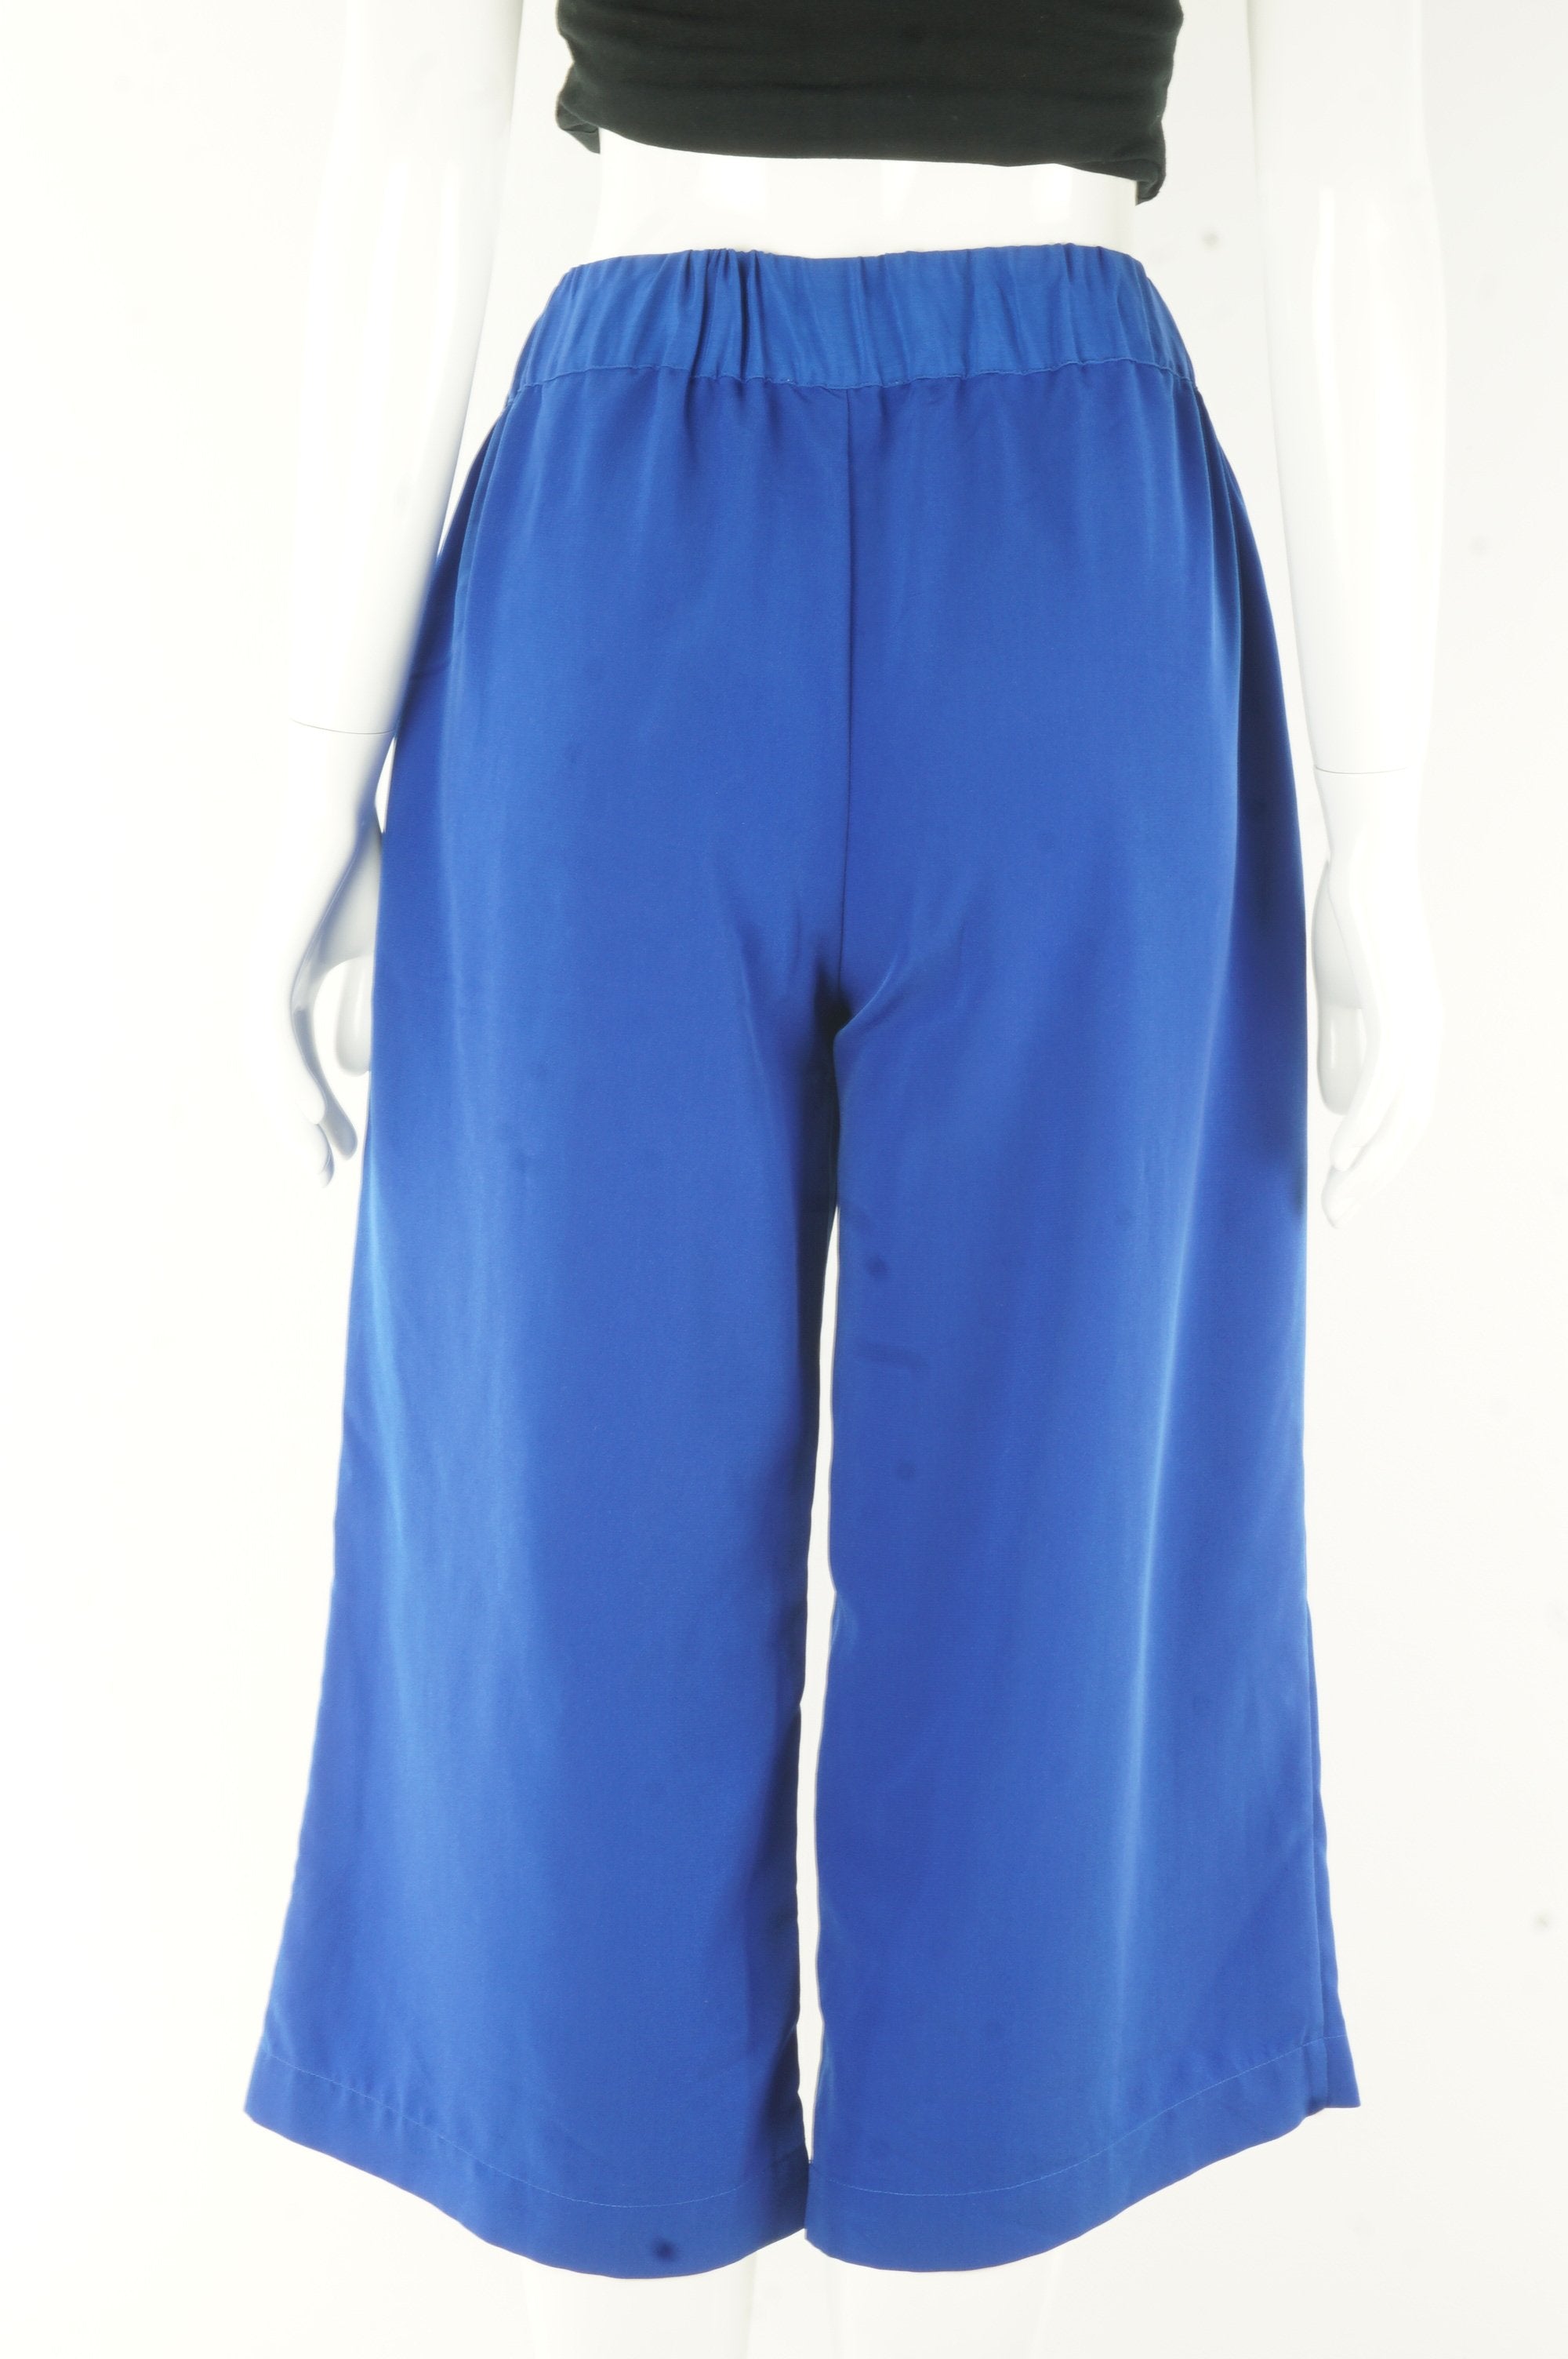 H Halston Cropped Wide Legged Pants, Casual or formal, you call. Comfort is garanteed!, Blue, 100% polyester, women's Pants & Shorts, women's Blue Pants & Shorts, H Halston women's Pants & Shorts, women's cropped wide-legged pants, women's comfortable loose pants